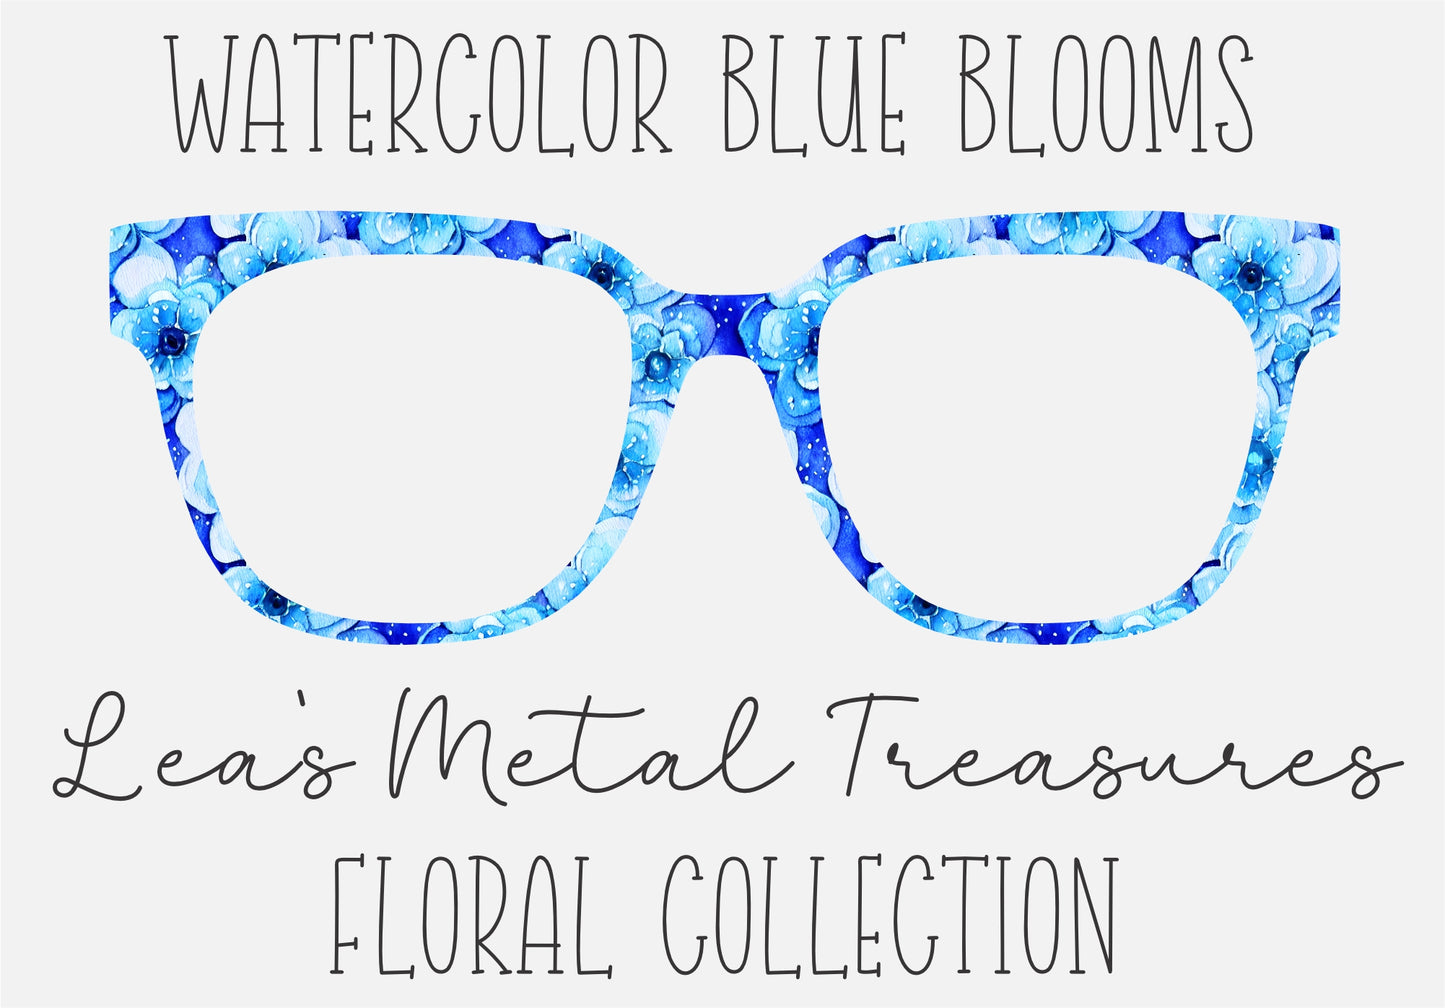 WATERCOLOR BLUE BLOOMS Eyewear Frame Toppers COMES WITH MAGNETS